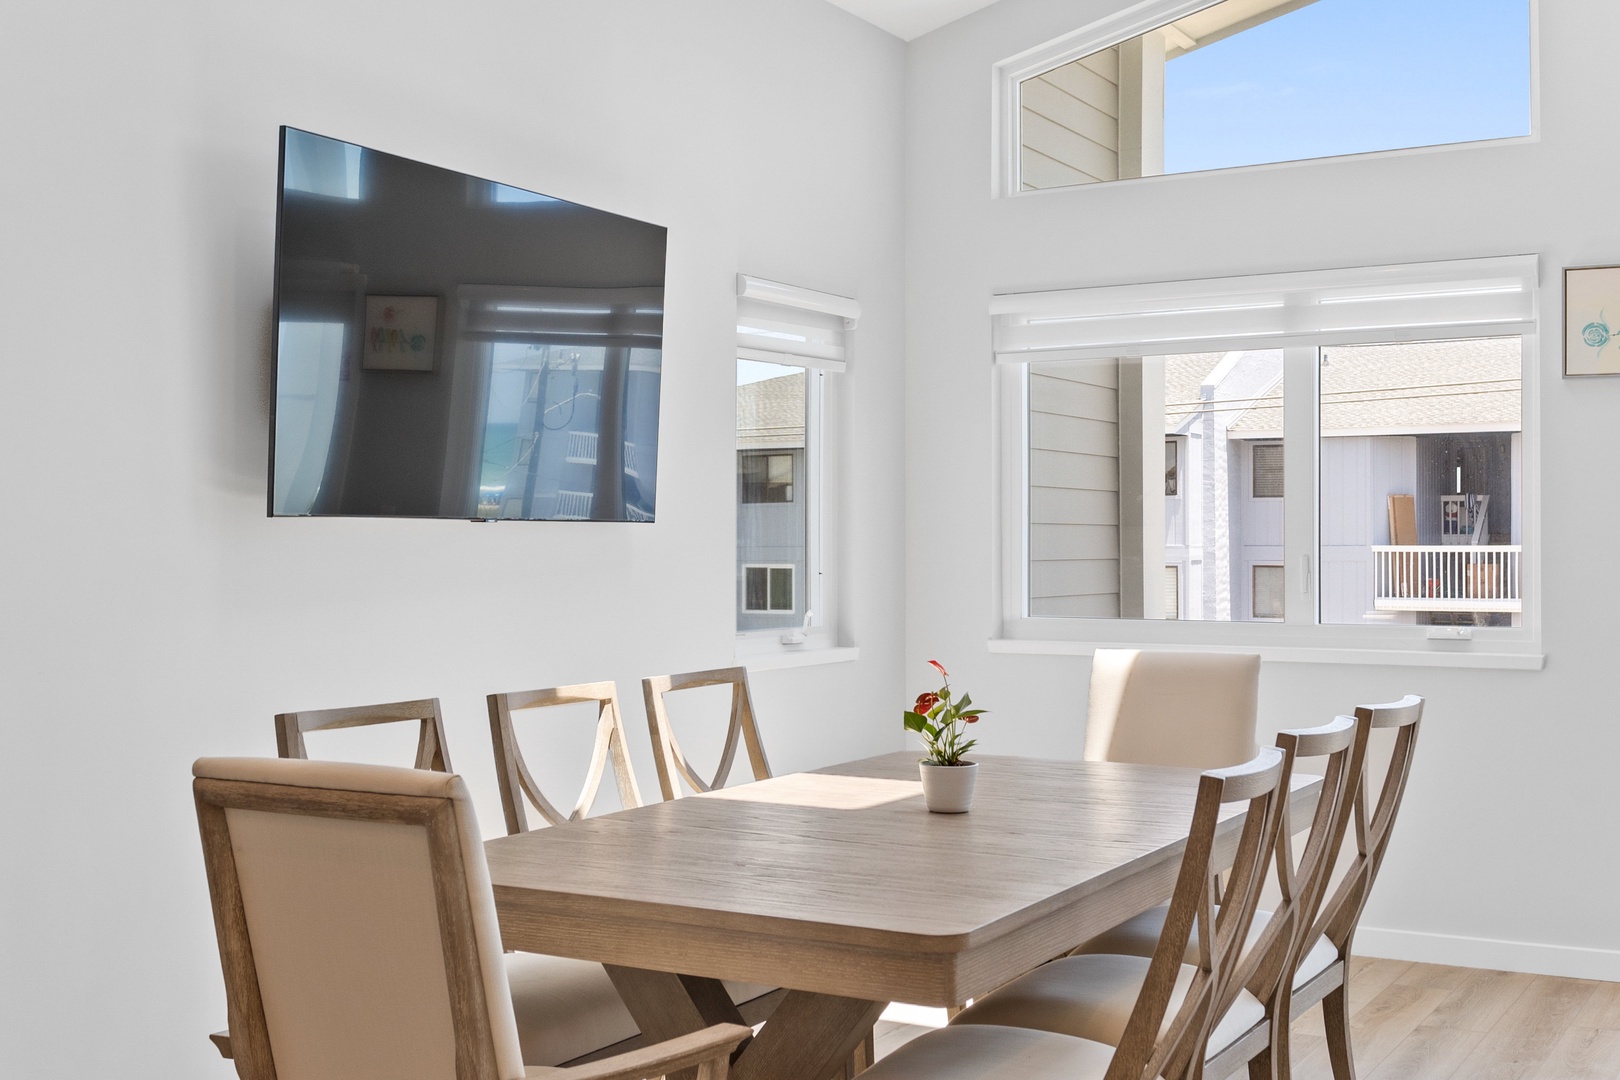 The open living, kitchen, and dining areas with a Smart TV and balcony access